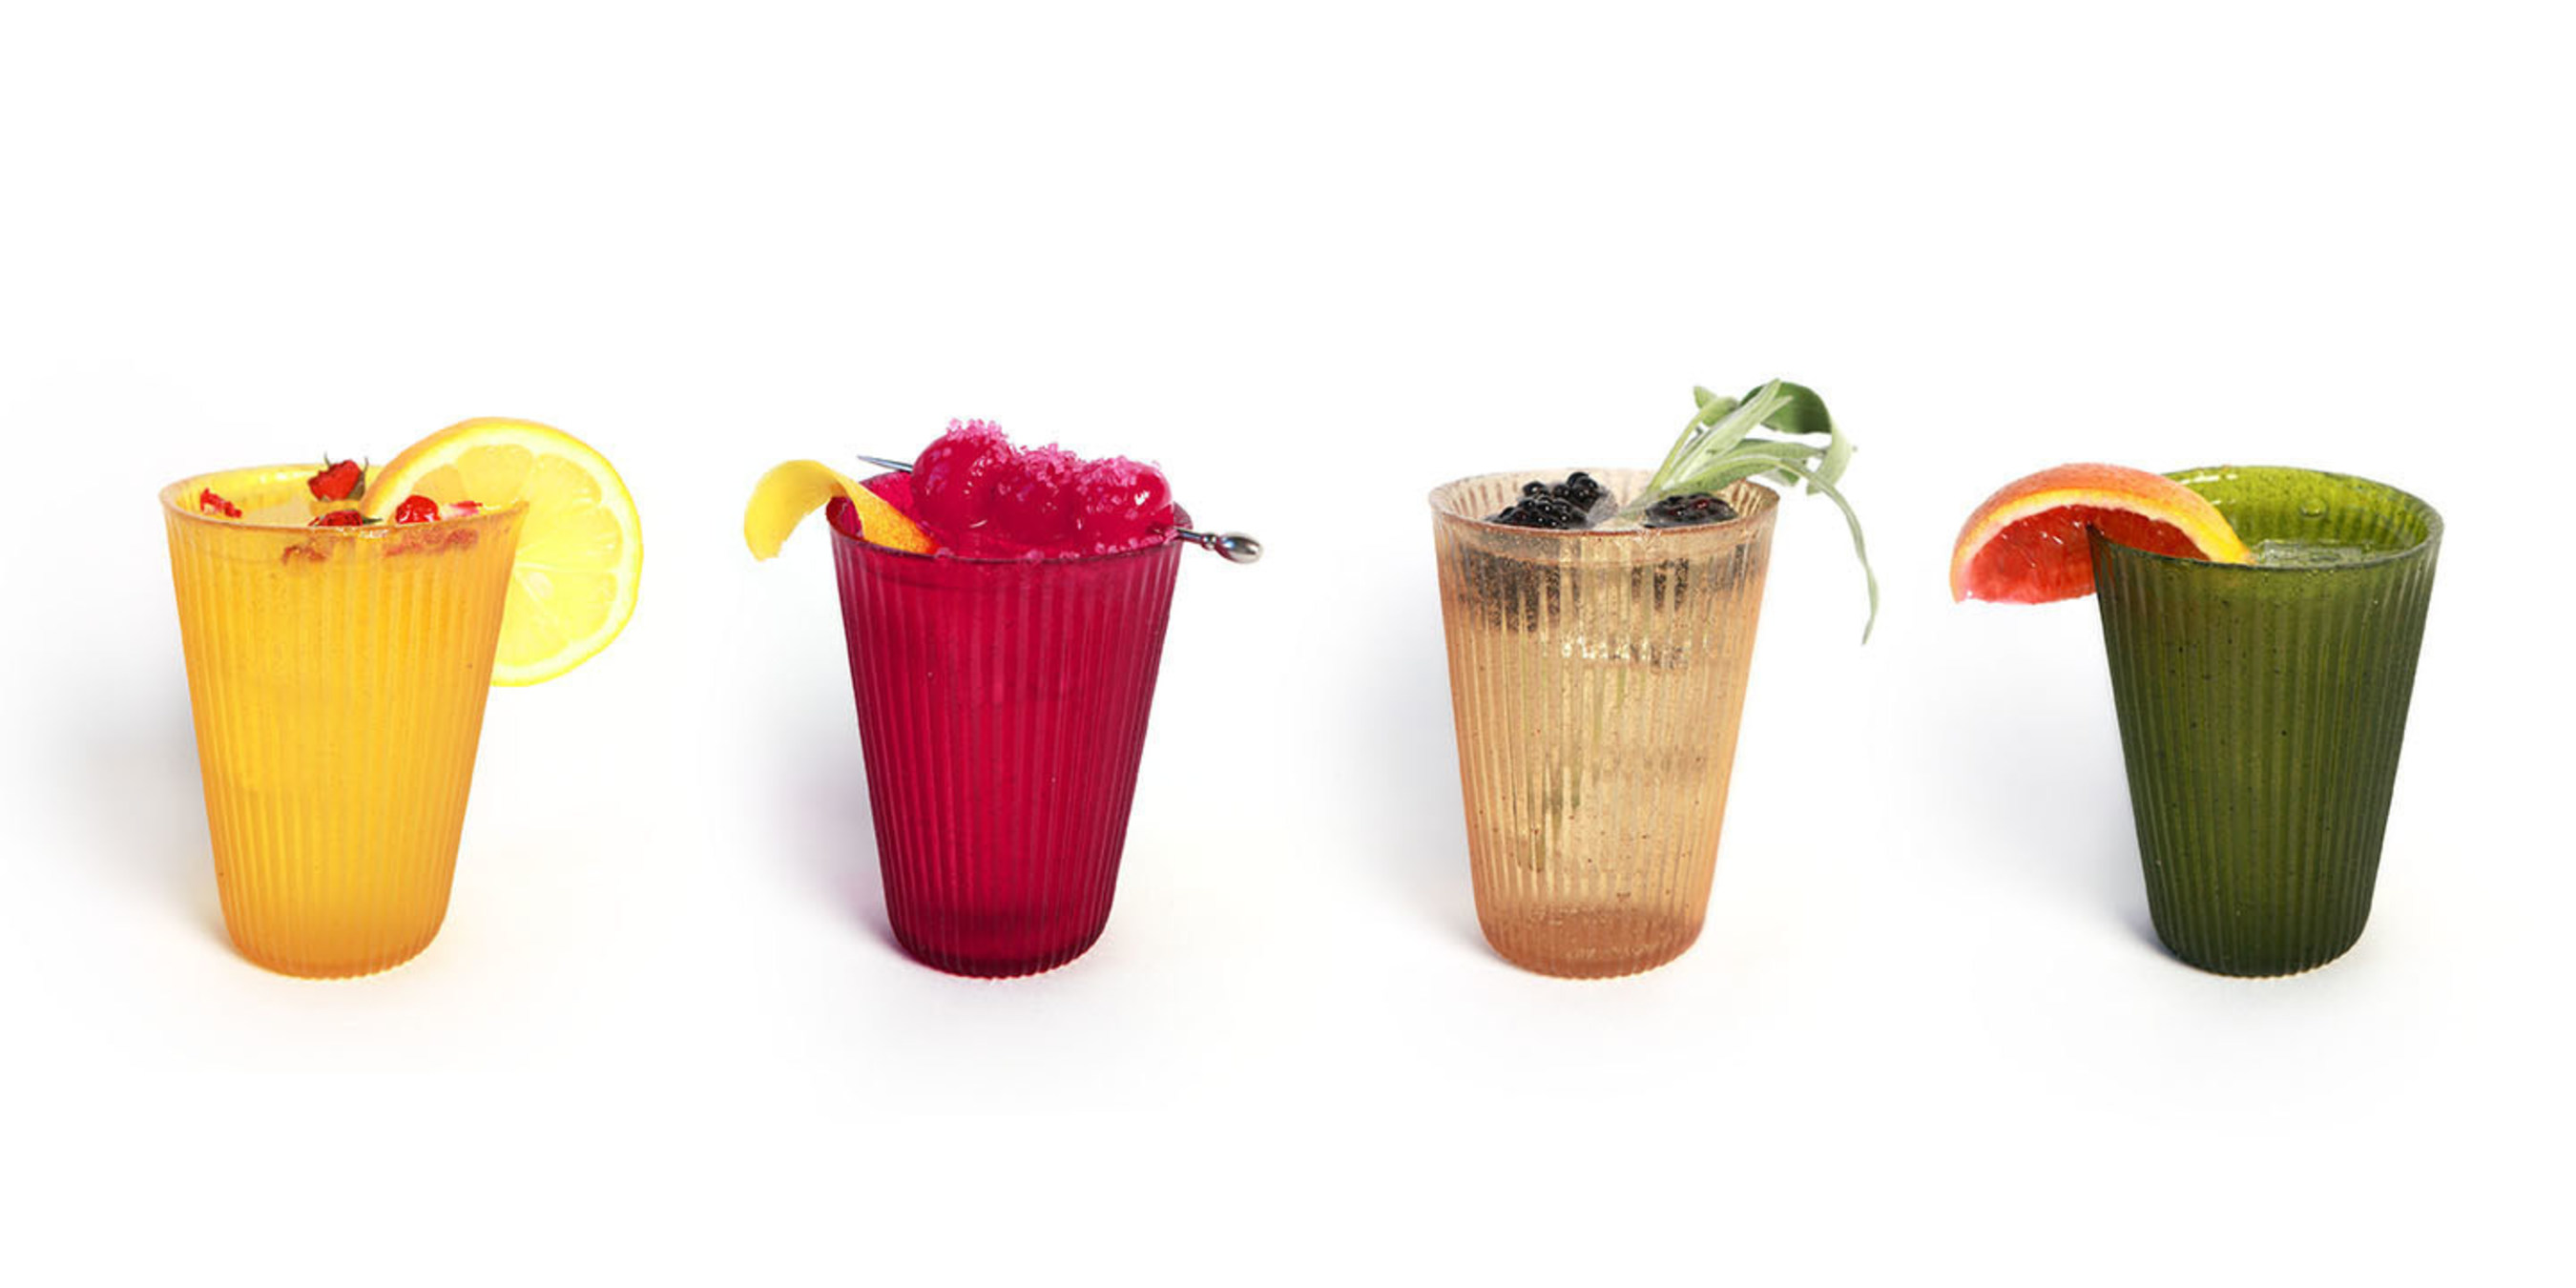 Loliware(R) is a new breed of cup, one that's both edible and biodegradable.